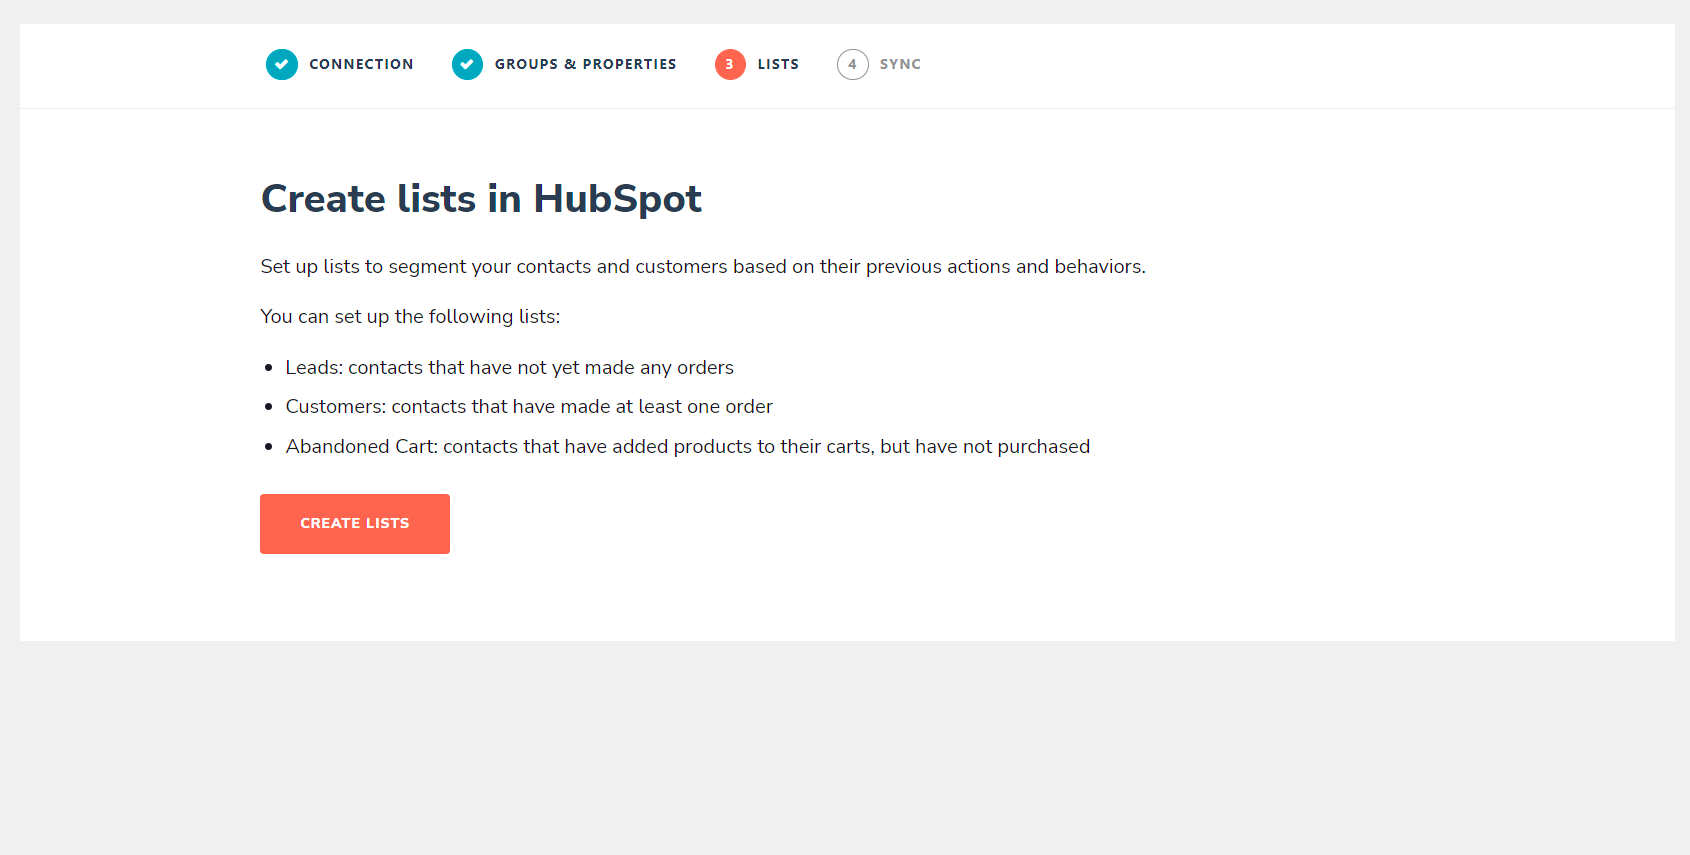 Create lists in HubSpot